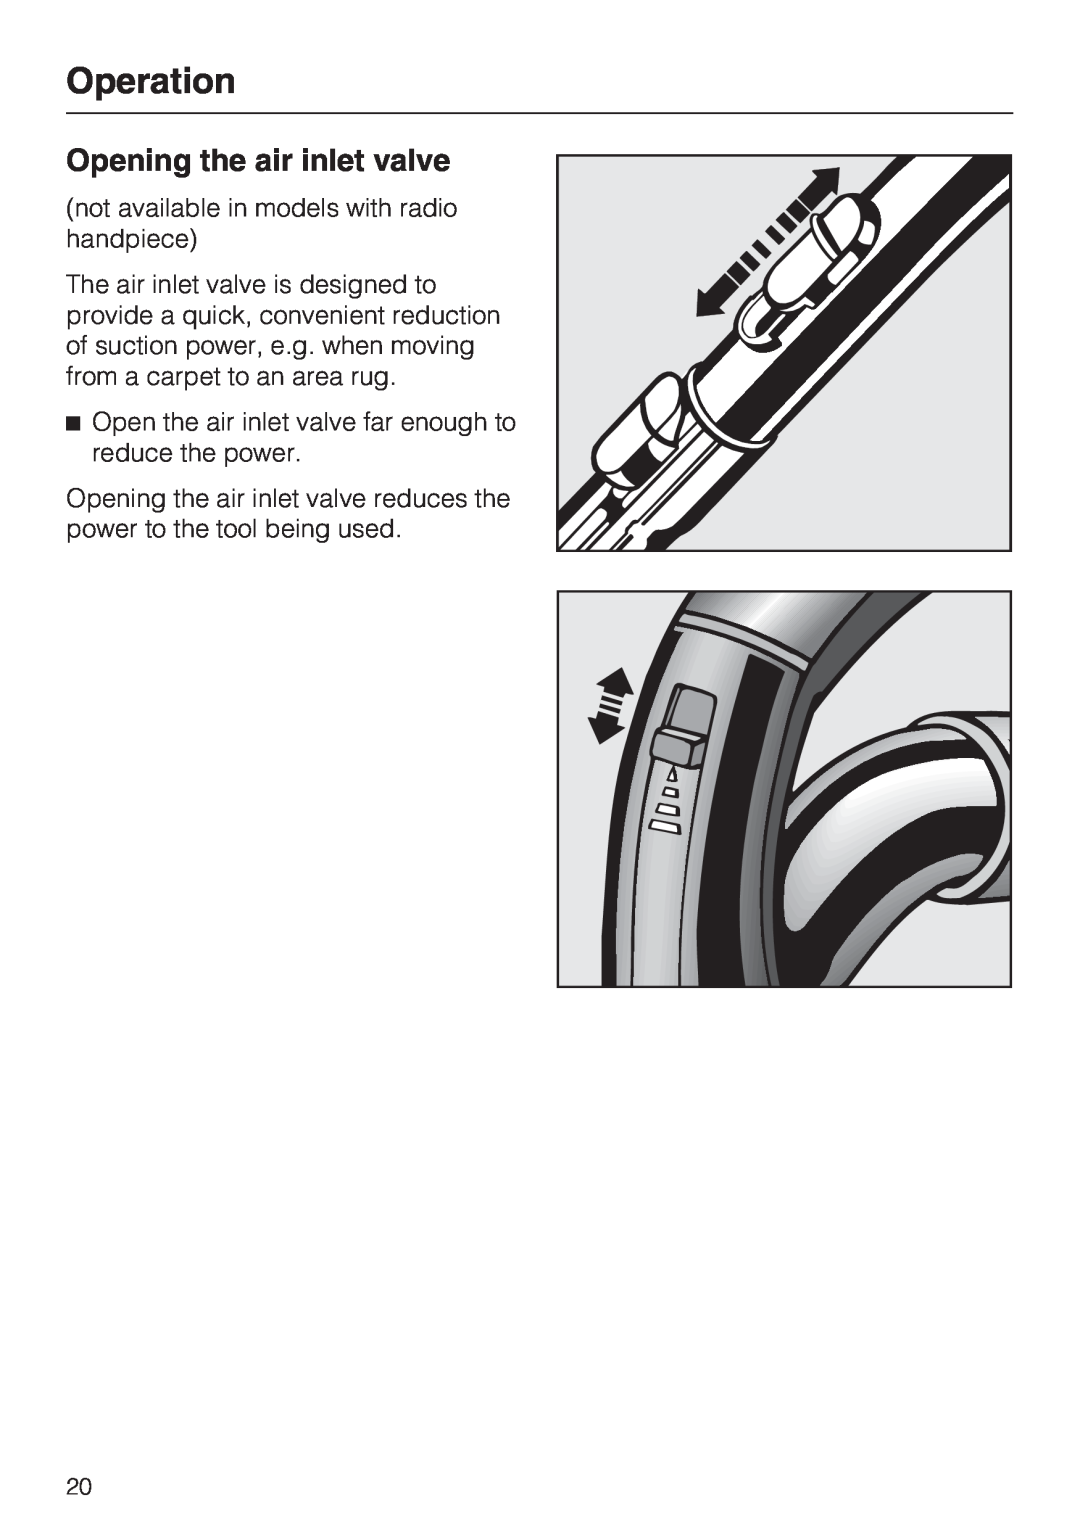 Miele S 4002 manual Operation, Opening the air inlet valve 